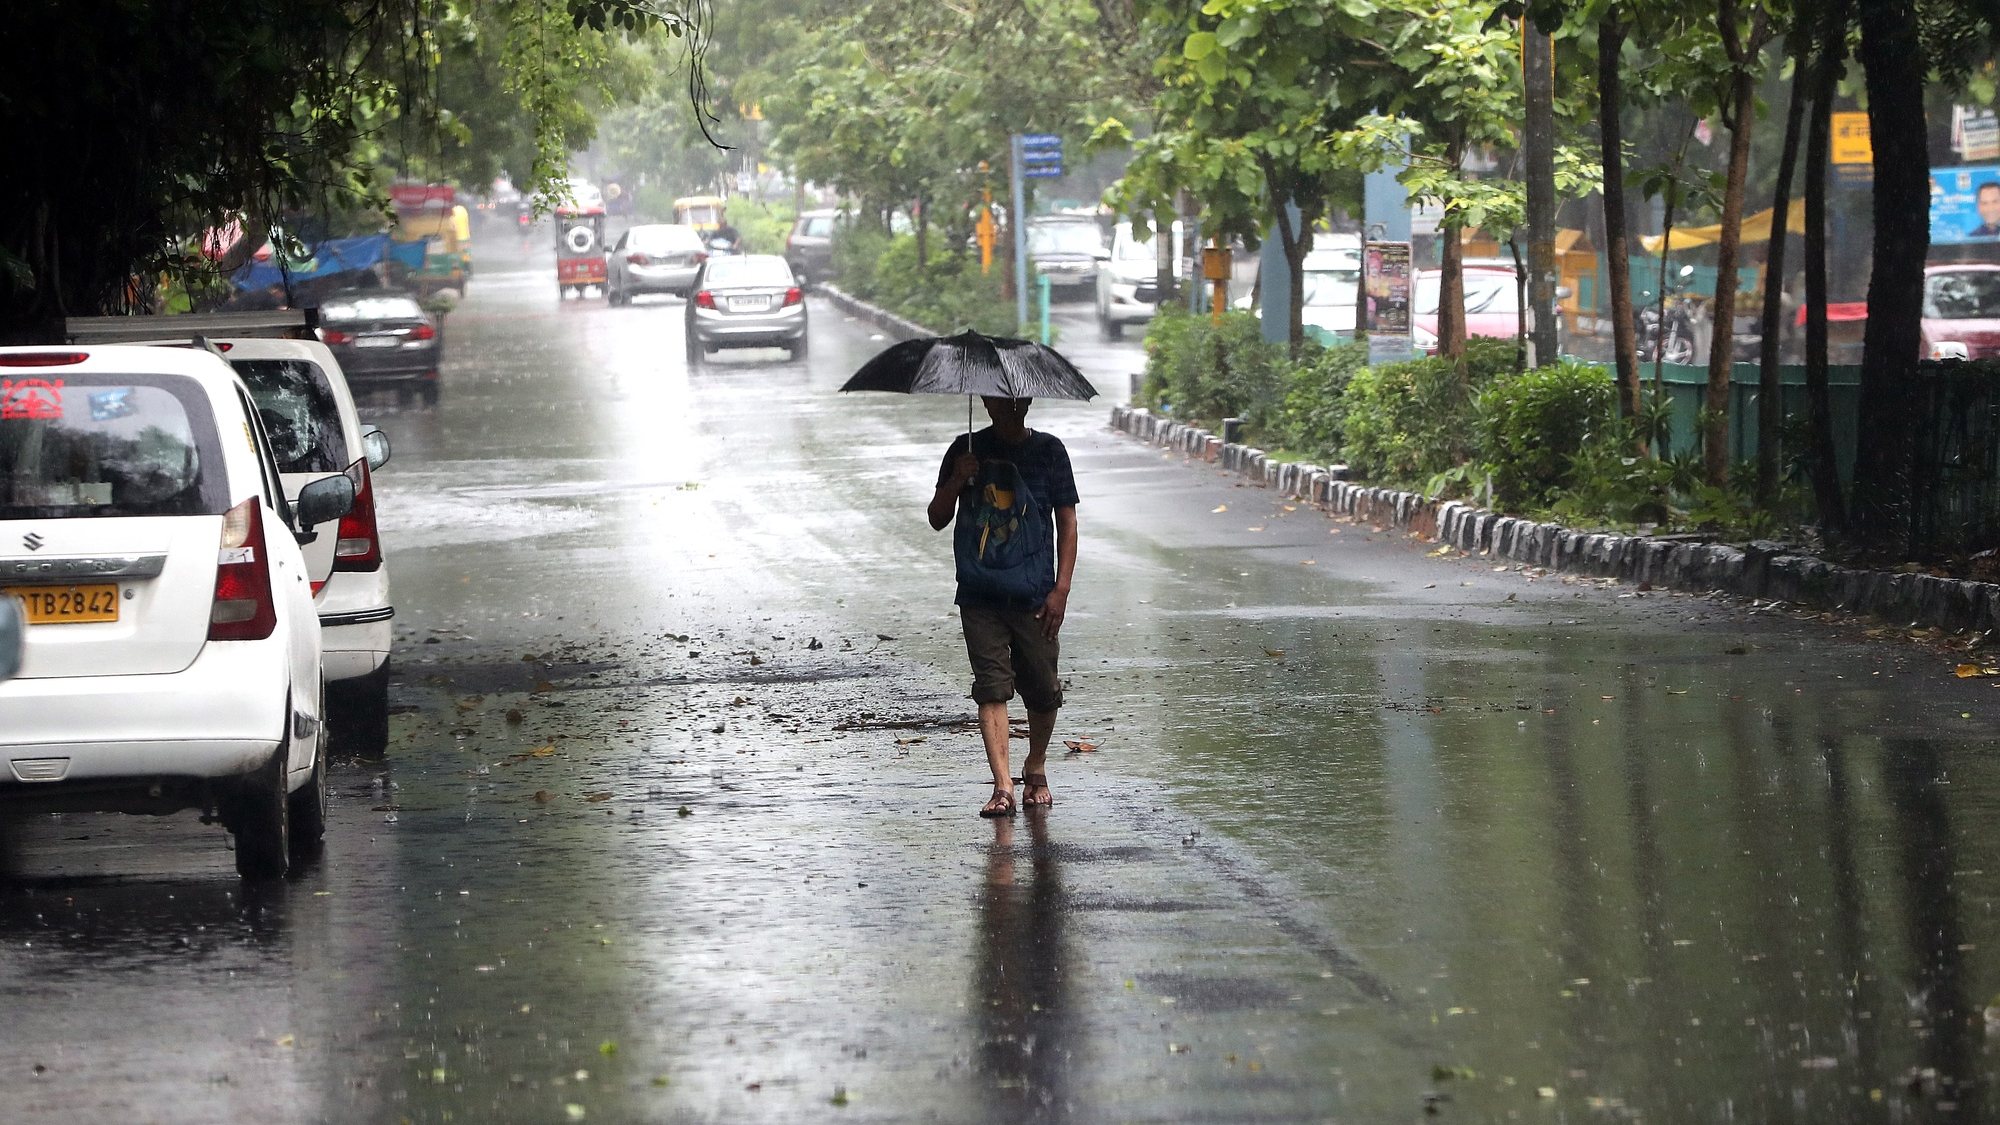 epa10737441 A man walks with his umbrella amid the rain in New Delhi, India, 10 July 2023. The water level at the old railway bridge reached 203.18 metres and the warning level is 204.5 metres. The India Meteorological Department said that Delhi received 153 mm of rain in 24 hours ending at 8:30 a.m. on 09 July, the most in a July day since 1982.  EPA/HARISH TYAGI